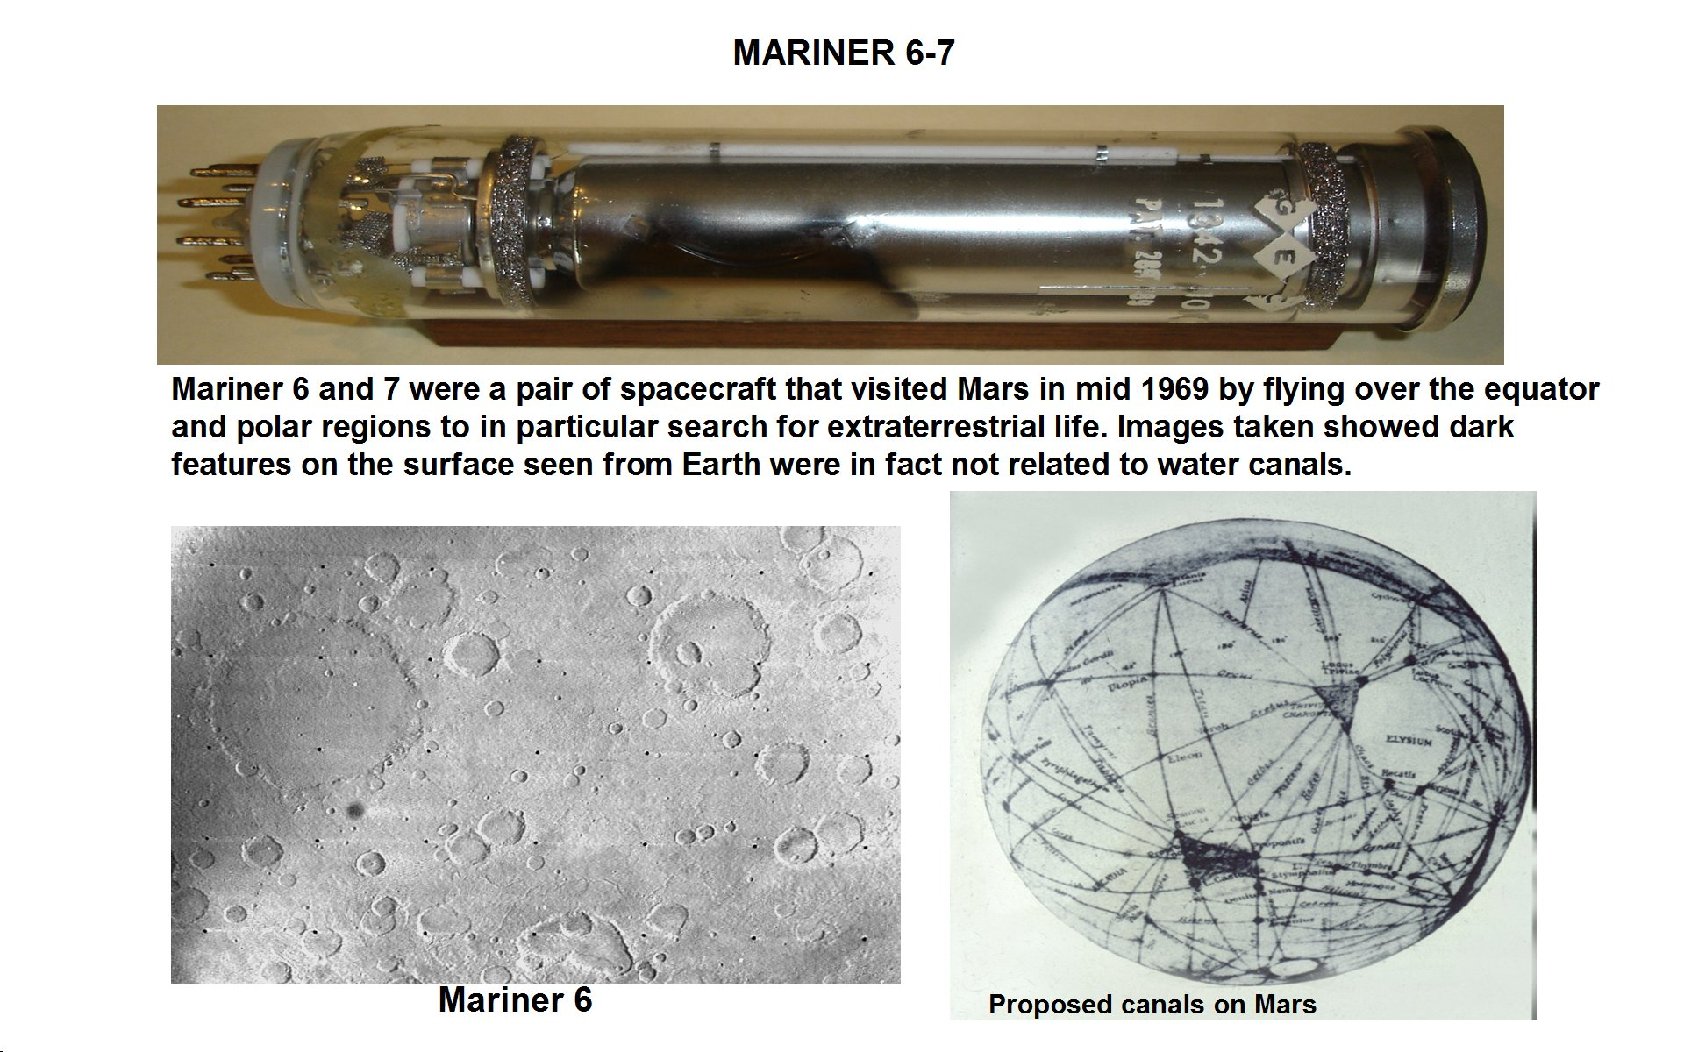 Janesick" Mariners 6 and 7 space mission imagers